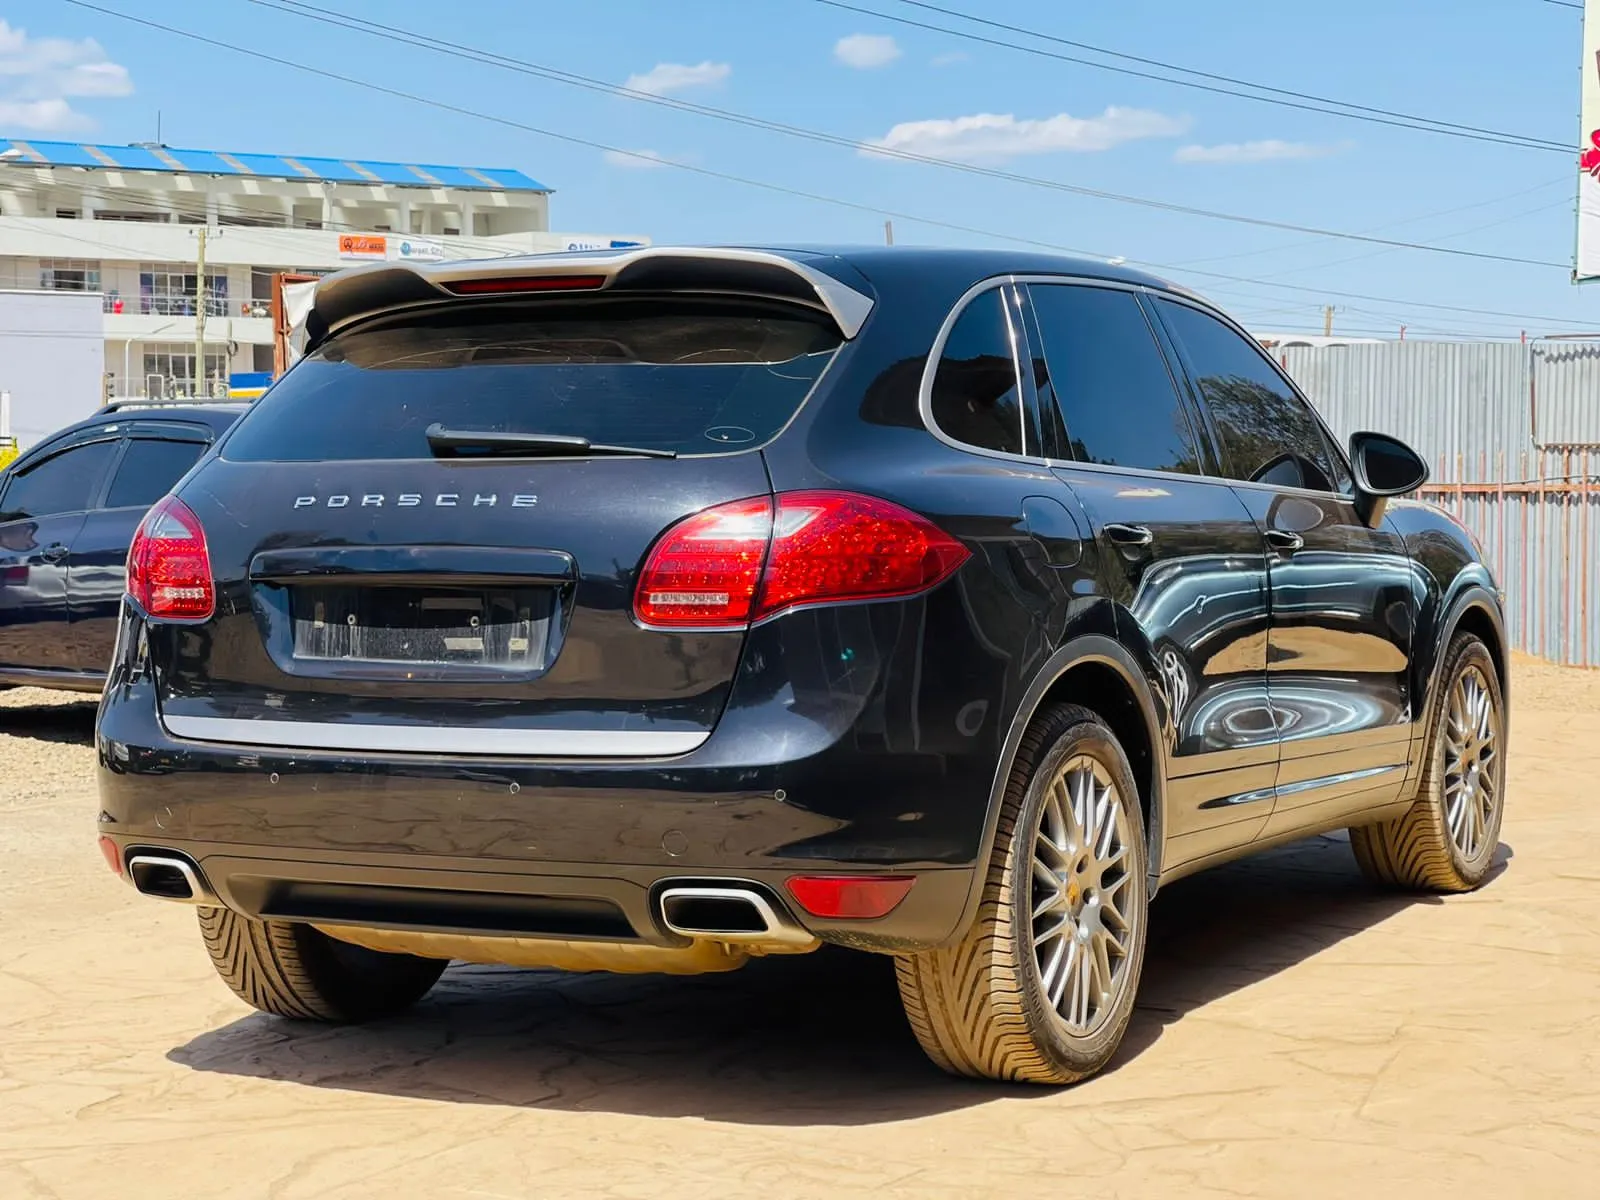 Cars Cars For Sale/Vehicles SUV-Porsche Cayenne 2014 Platinum Edition Hottest New Cheapest 17